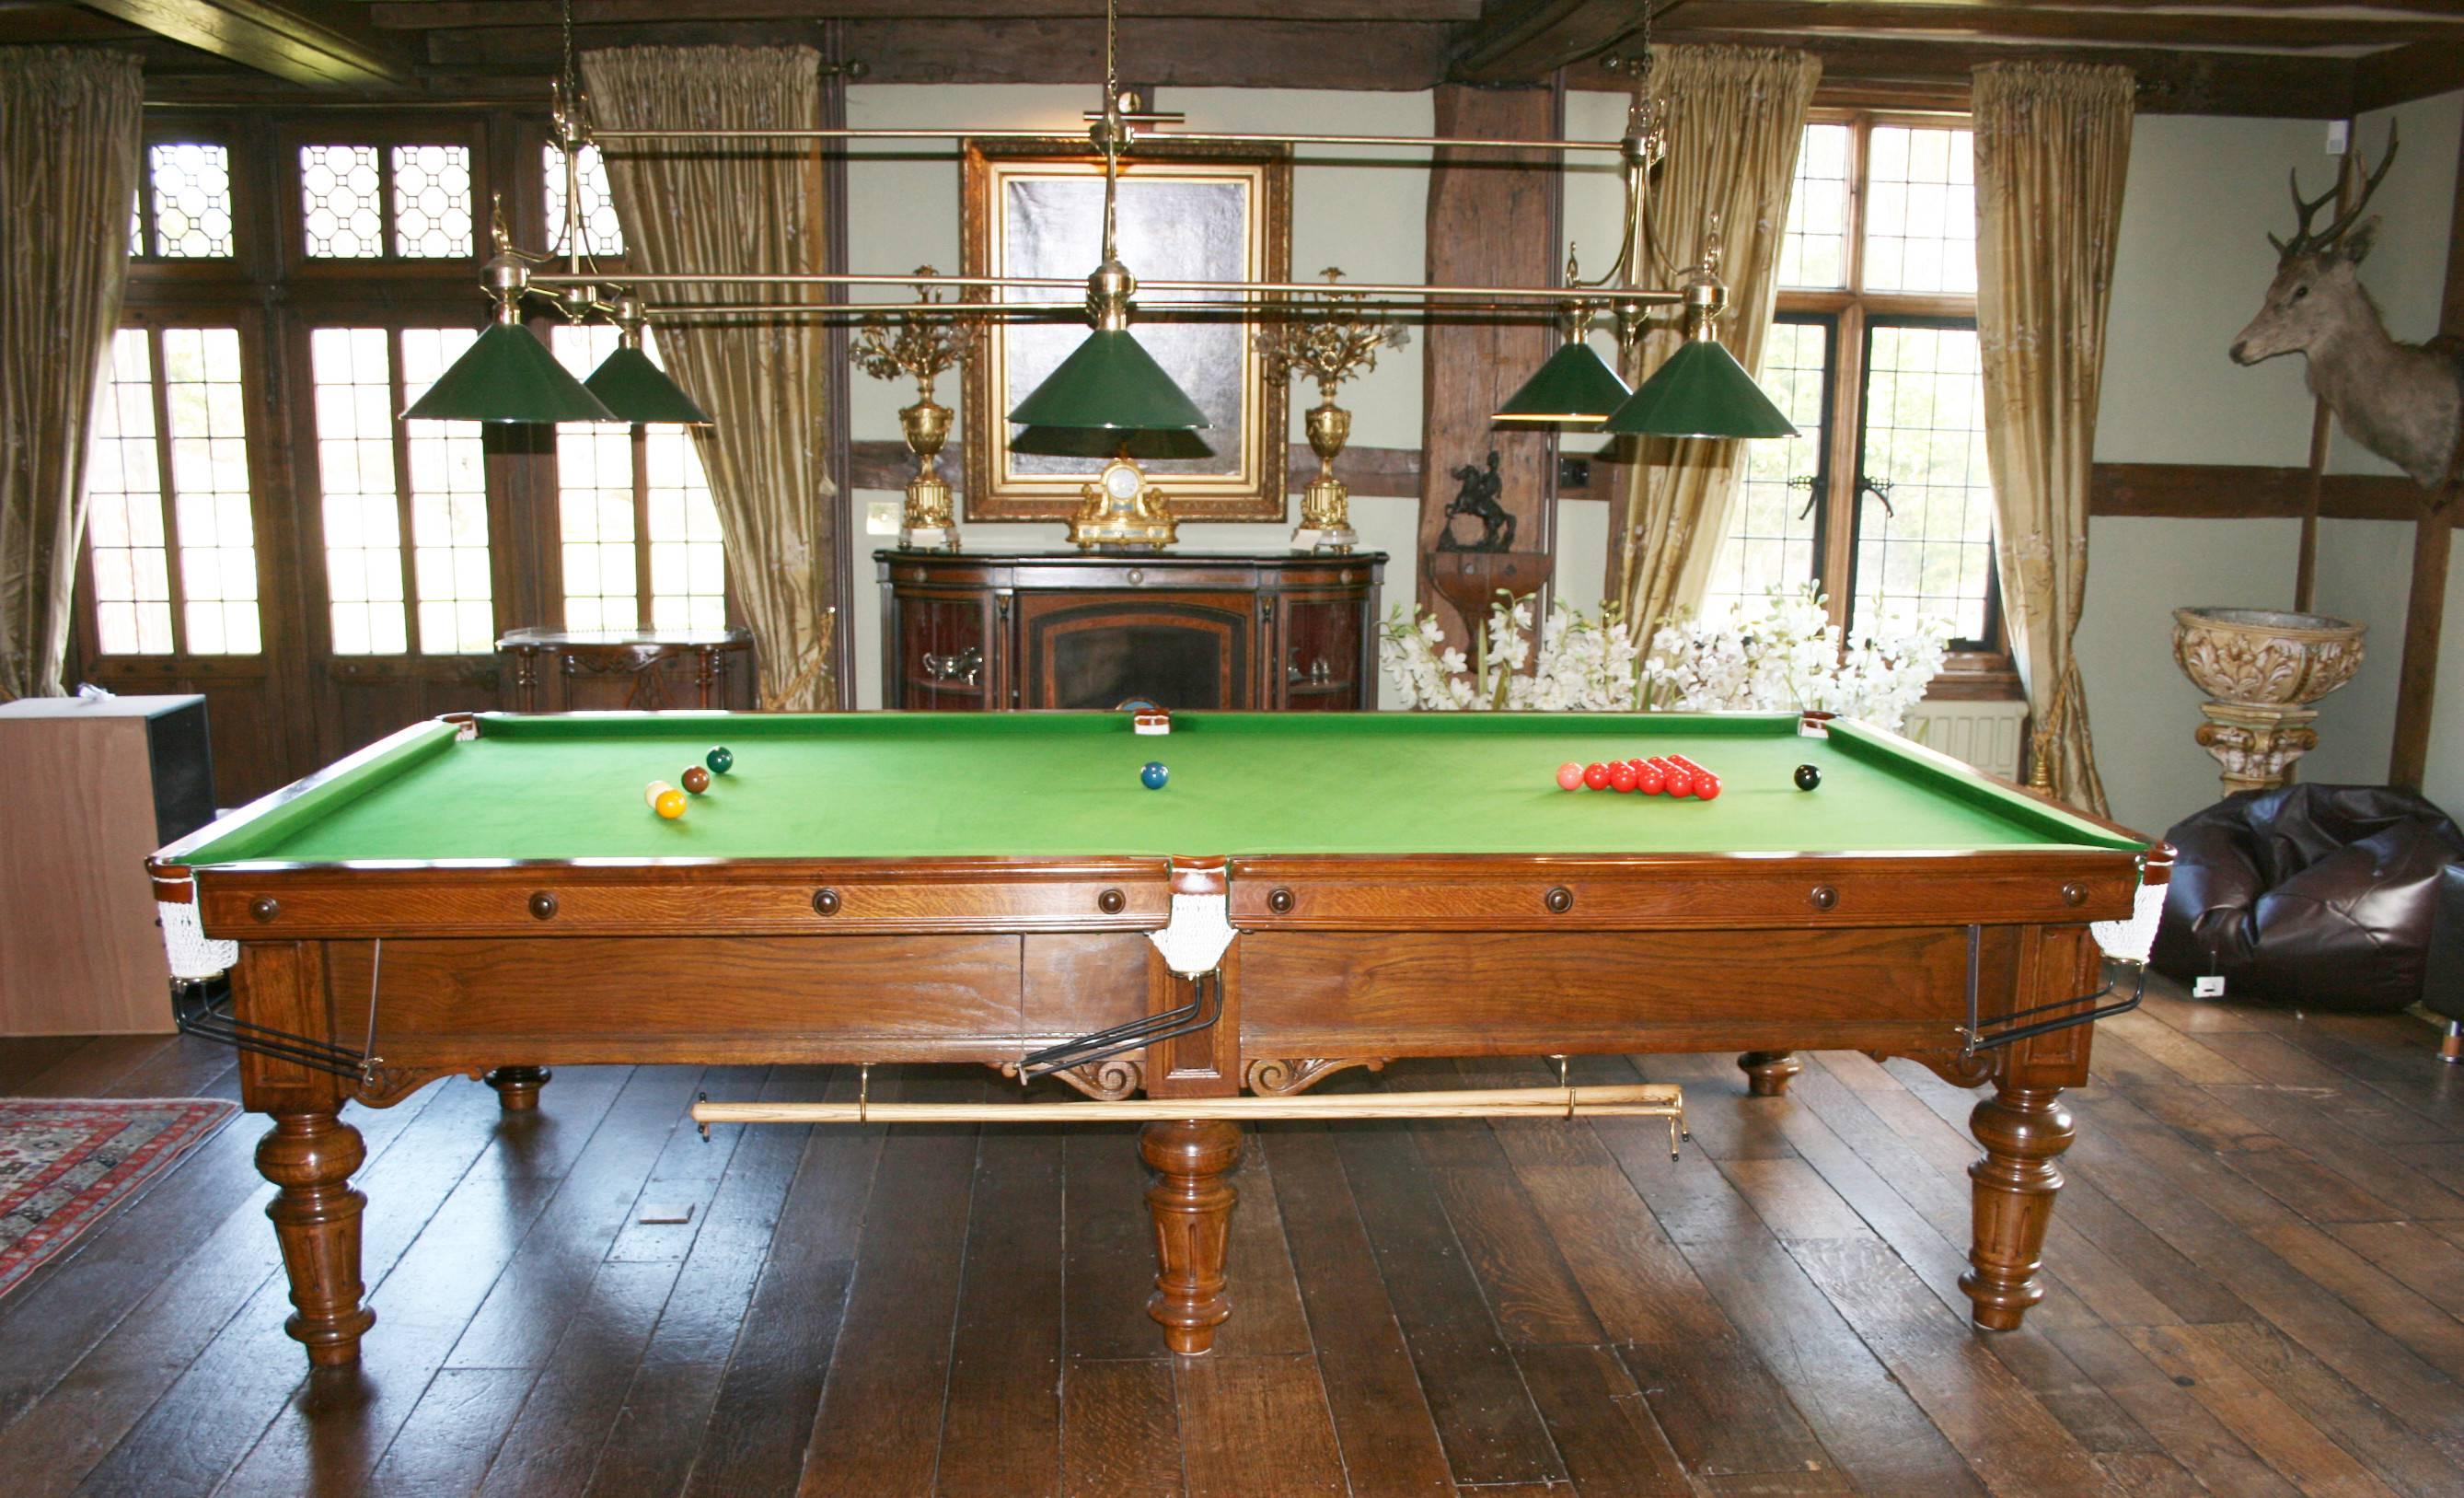 A very attractive ¾ size billiard table, snooker table originally manufactured by Burroughes & Watts. The table is made of oak and incorporates 6 good solid turned legs. The playing surface is a 4 piece slate bed covered in green playing cloth.